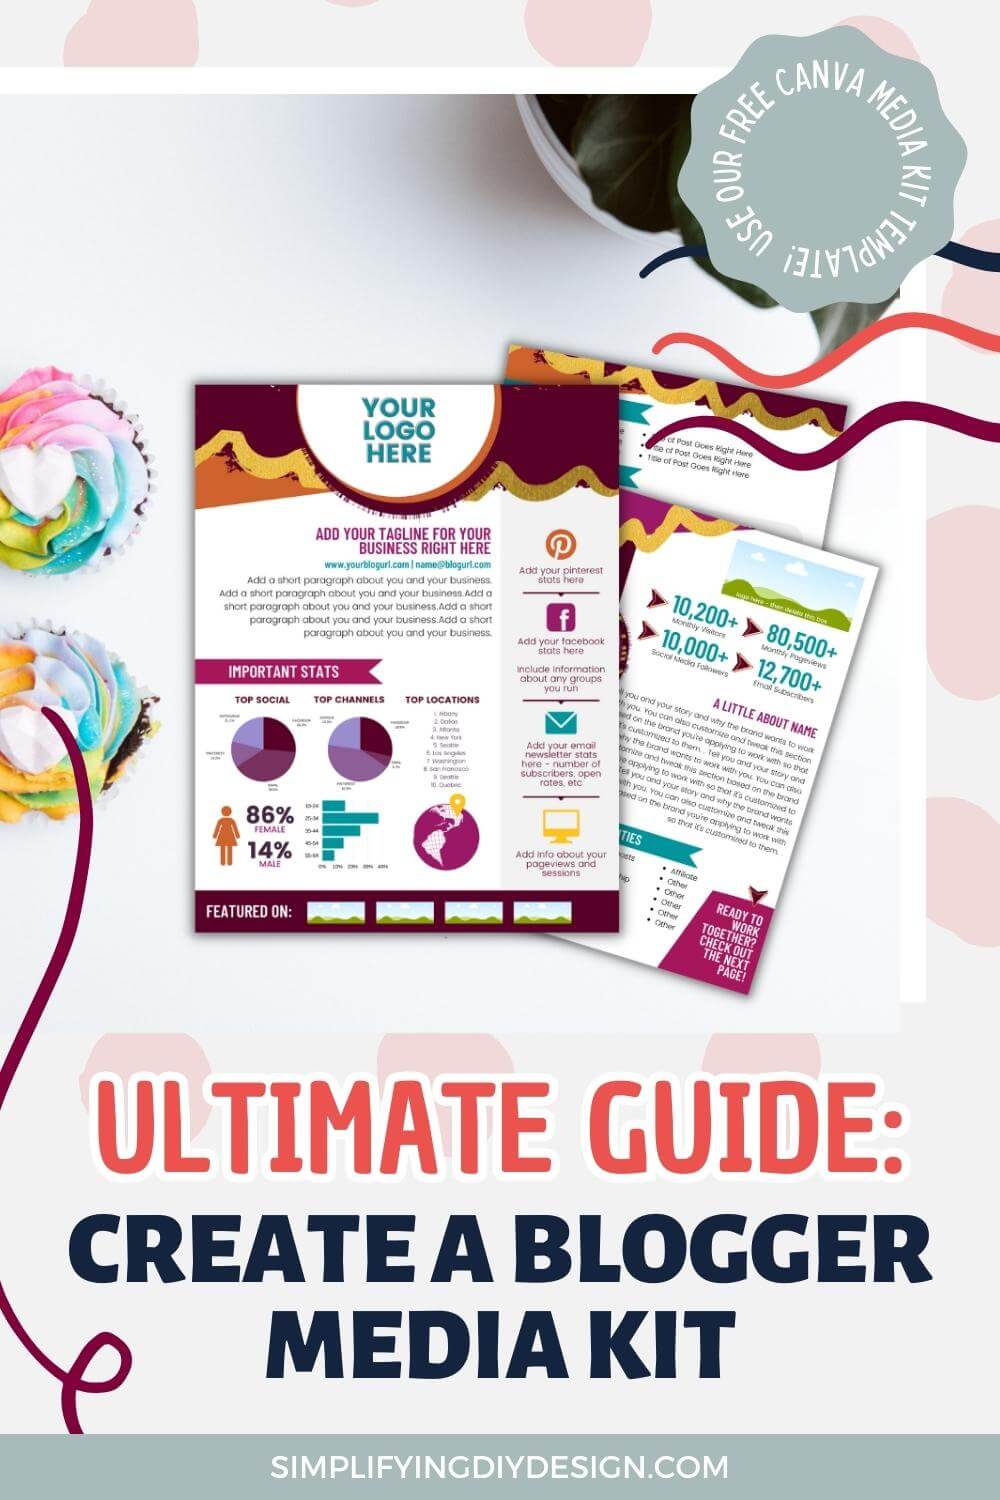 If you're ready to monetize your blog with sponsored opportunities, you need a blogger media kit. Use our FREE blogger media kit template to get started!